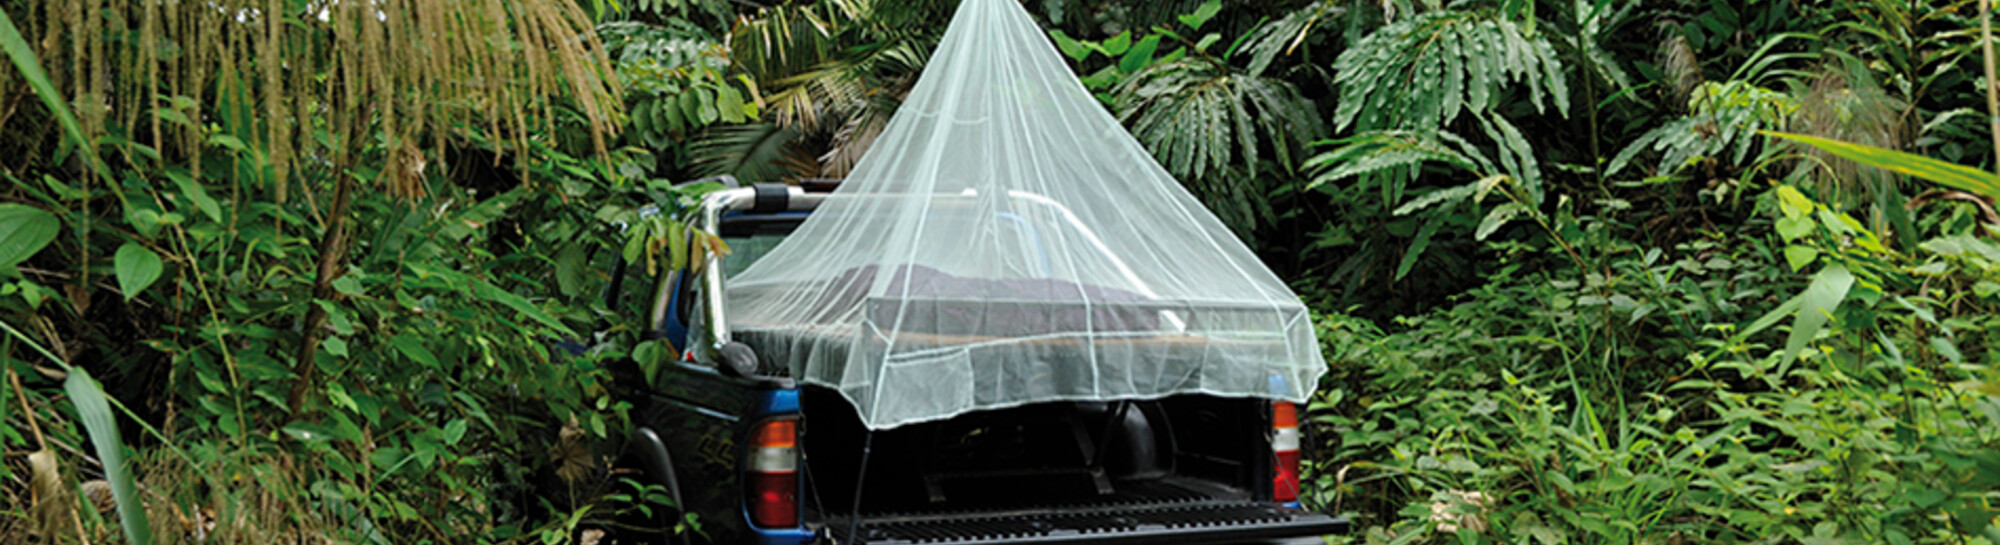 Mosquito Nets - cocoon - The Original